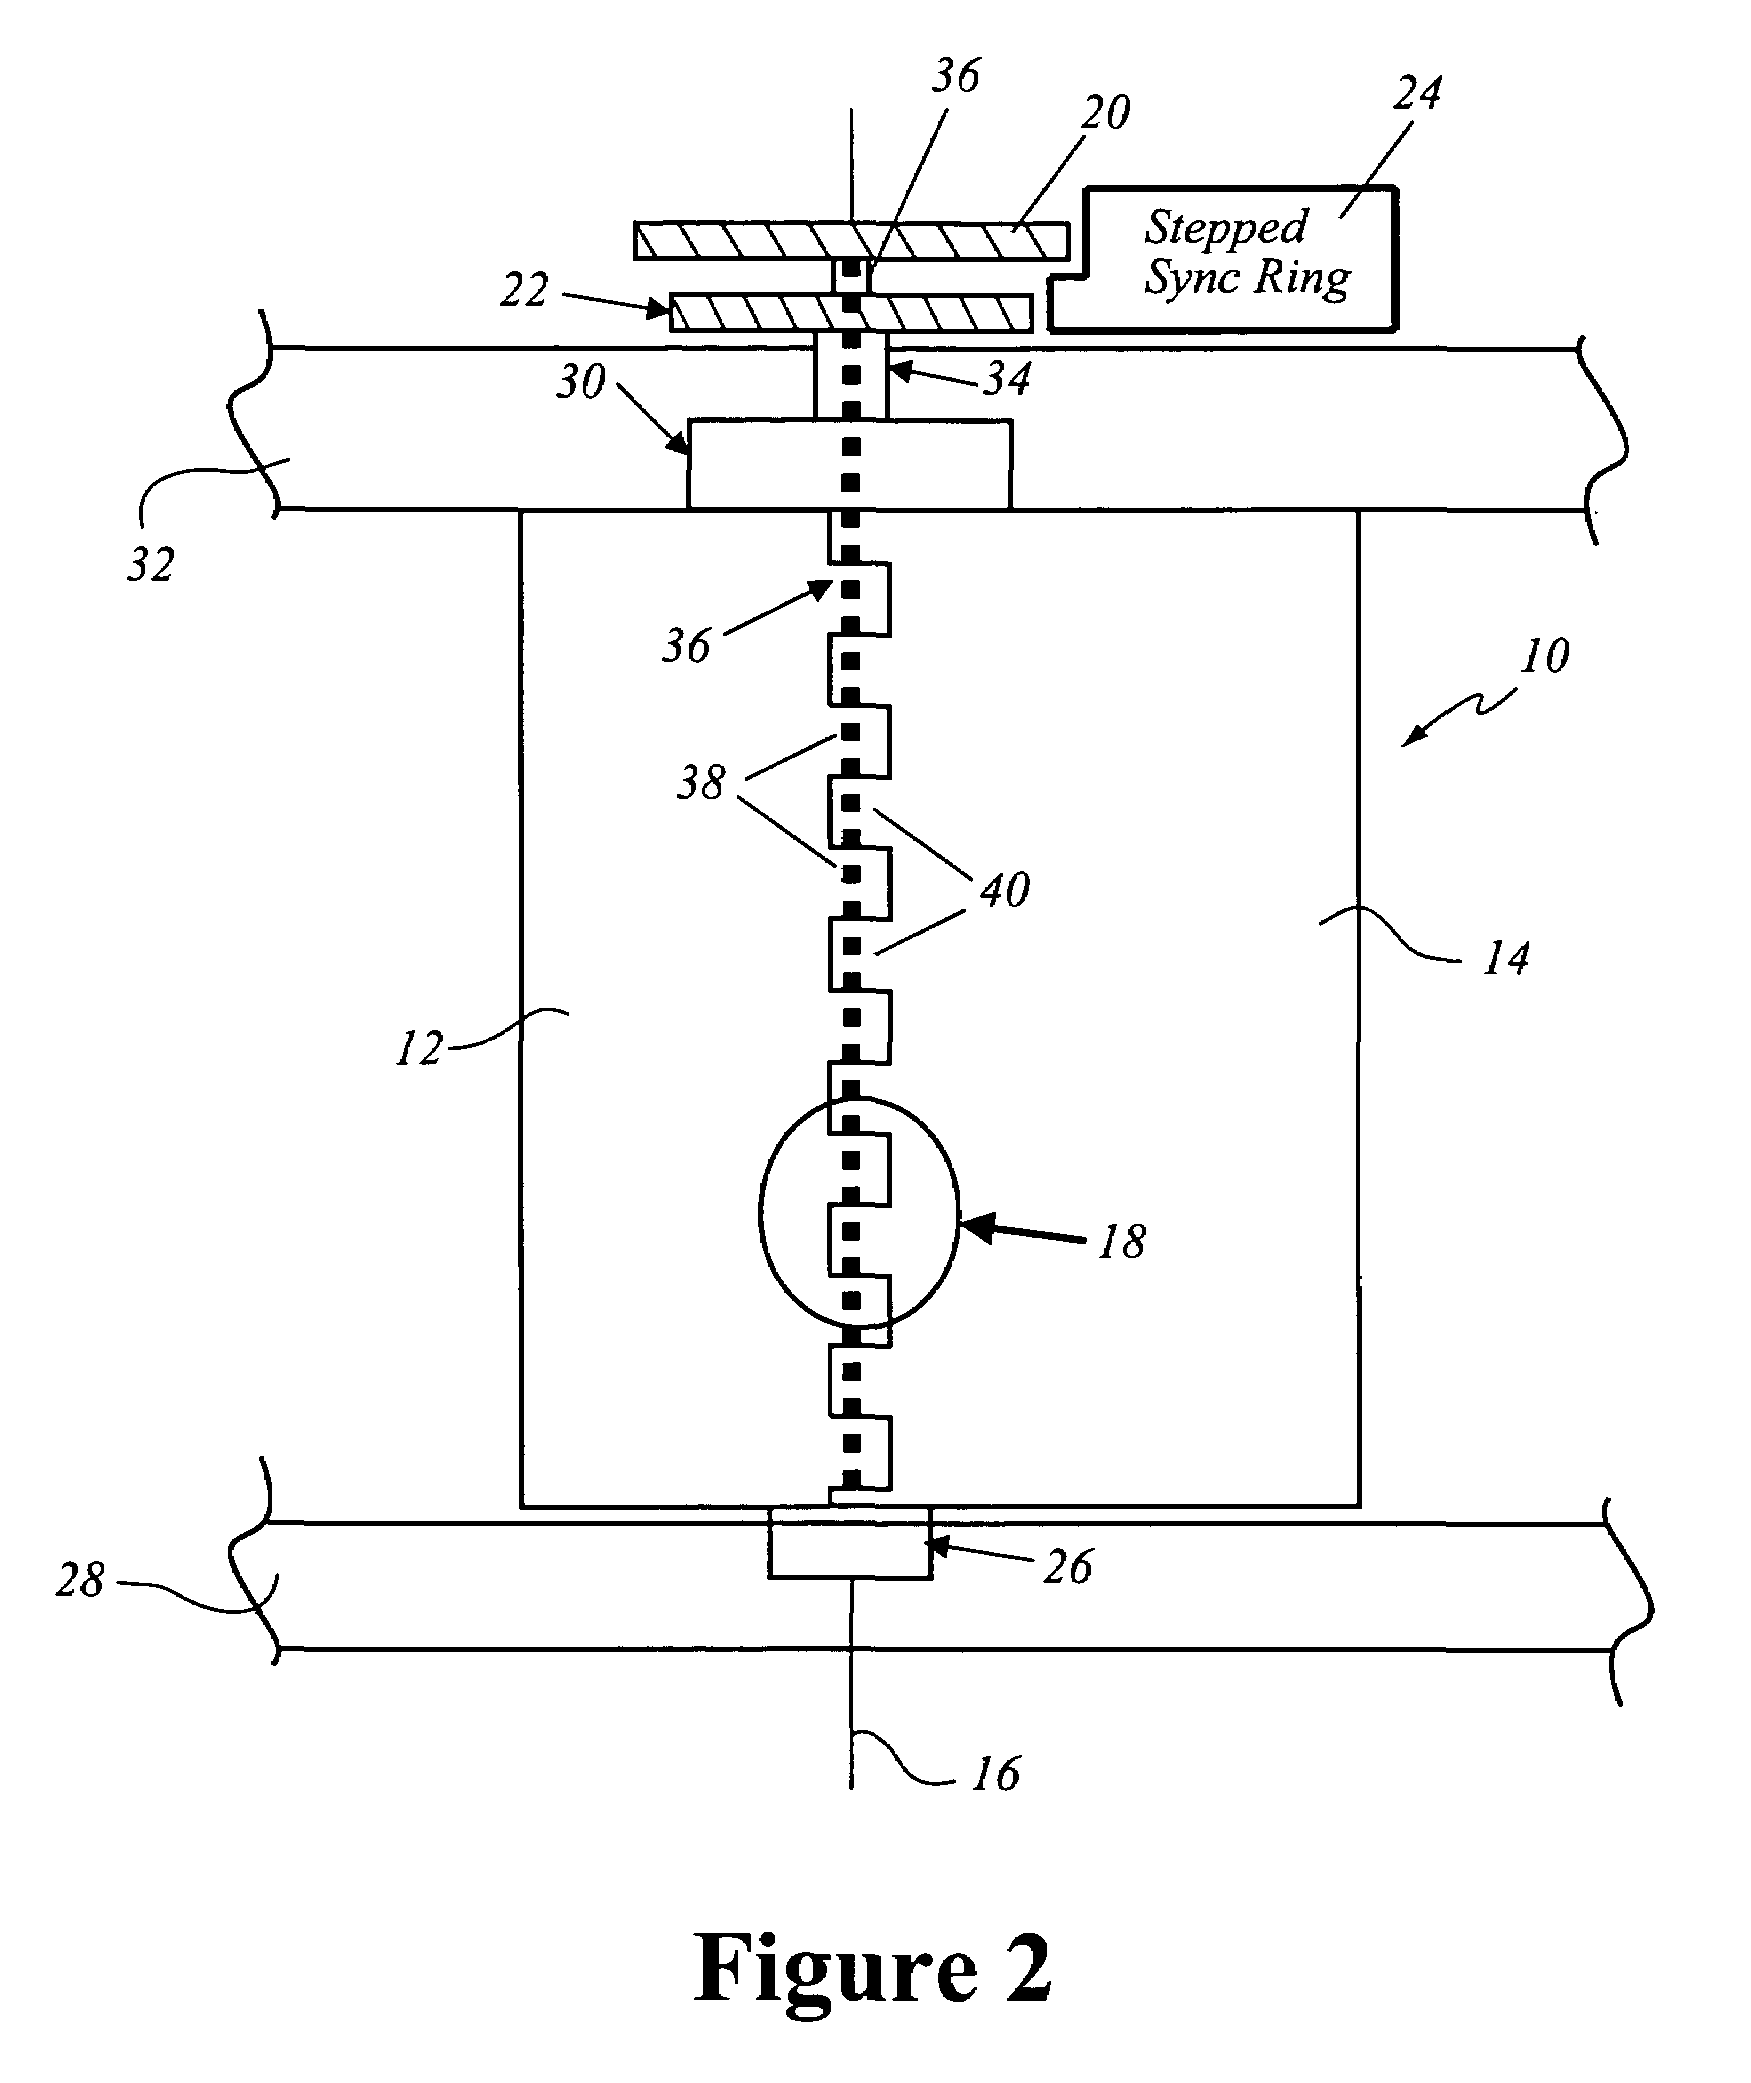 Variable camber and stagger airfoil and method